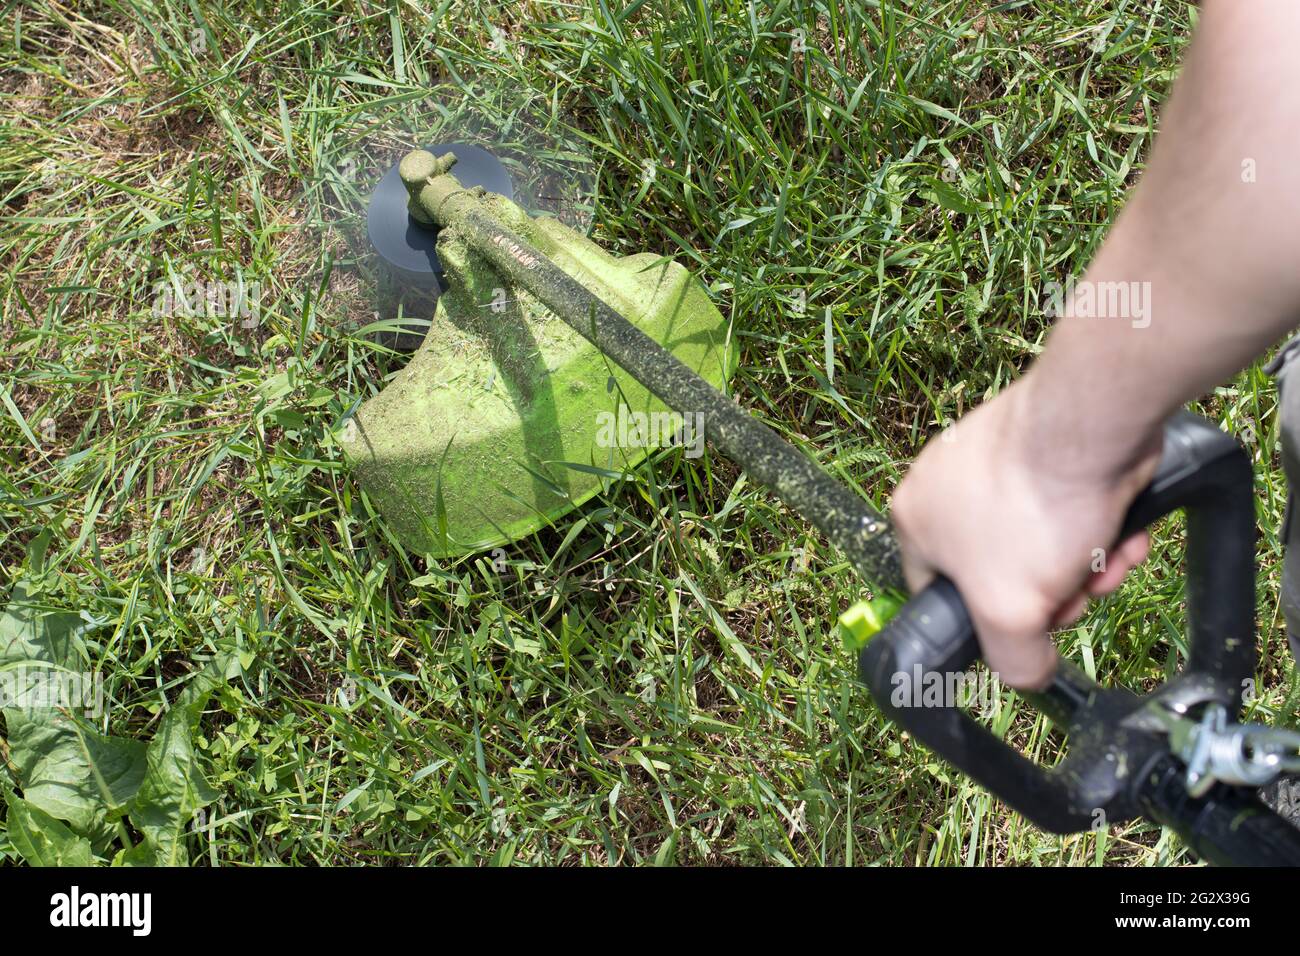 A man with an electric lawn mower mows the grass. For a gardening equipment store. Stock Photo